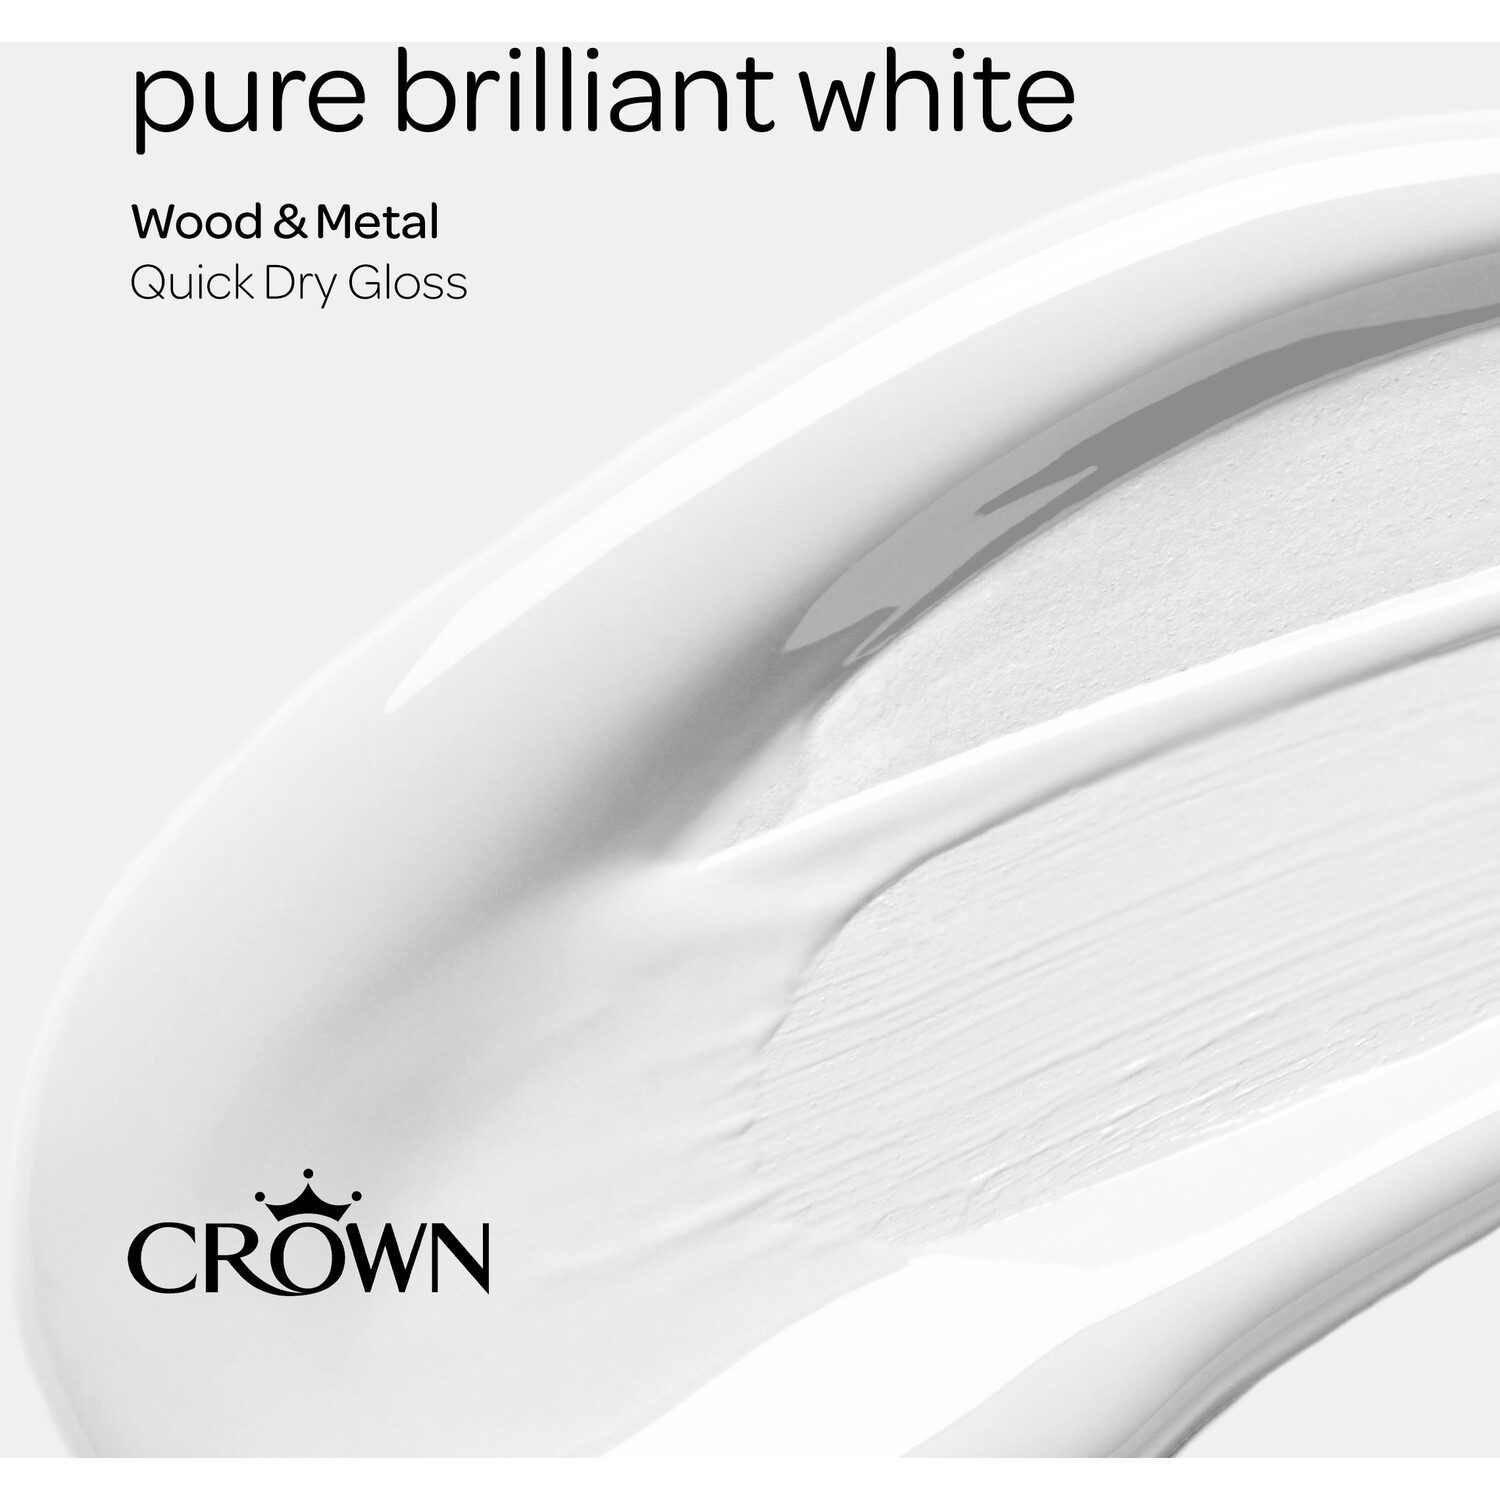 Crown Wood and Metal Pure Brilliant White Gloss Paint 750ml Image 4